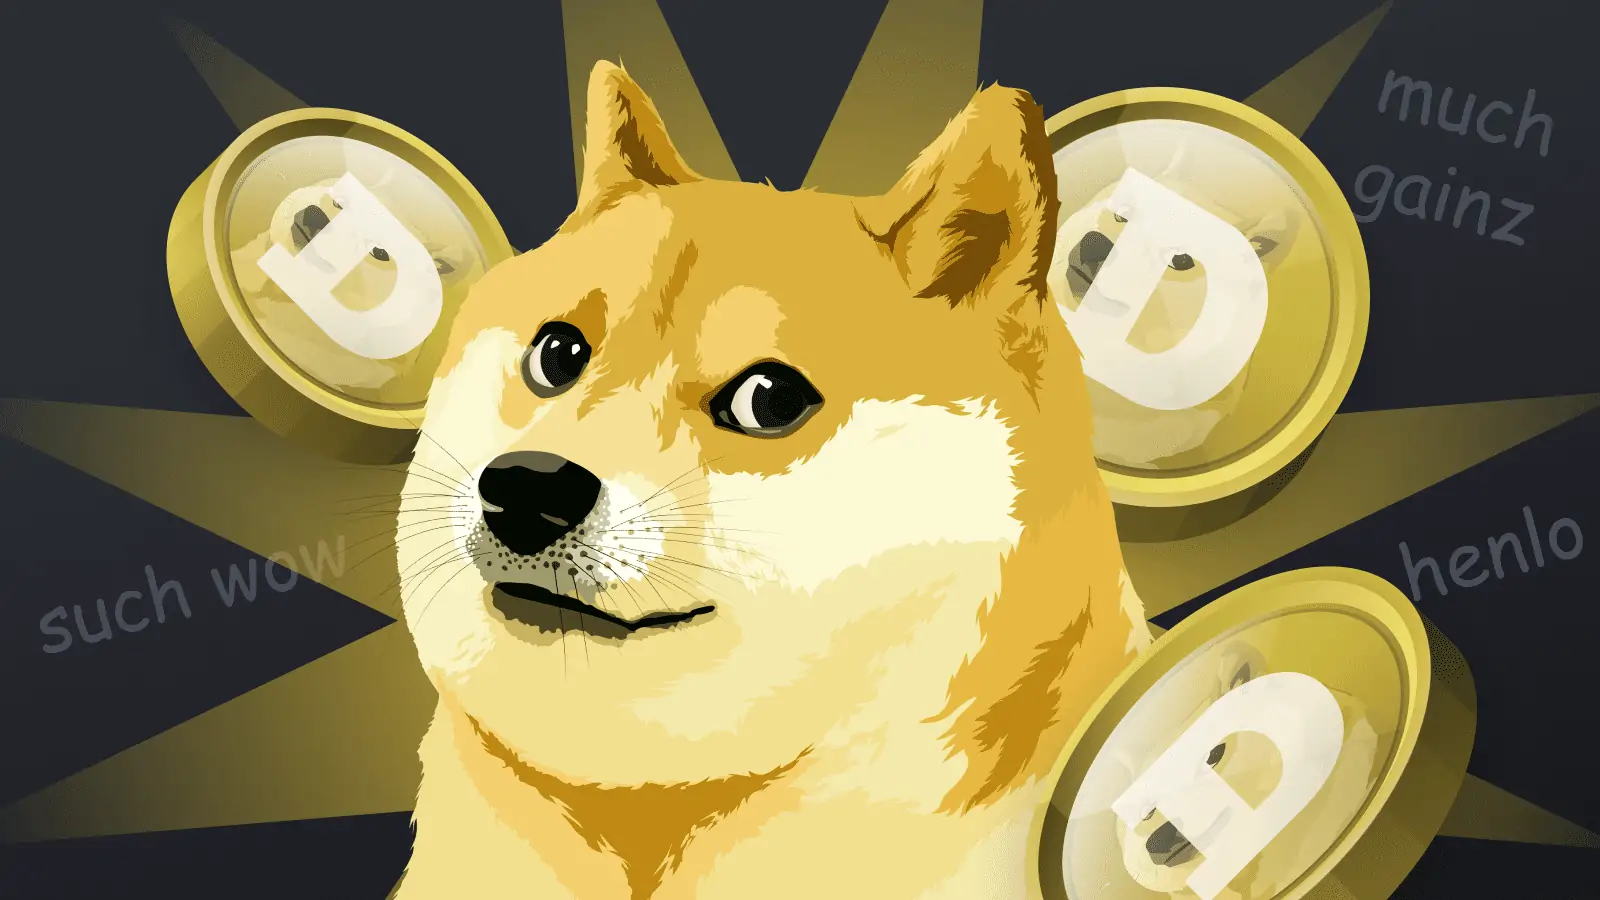 “Dogecoin still has potential as currency,” -Elon Musk